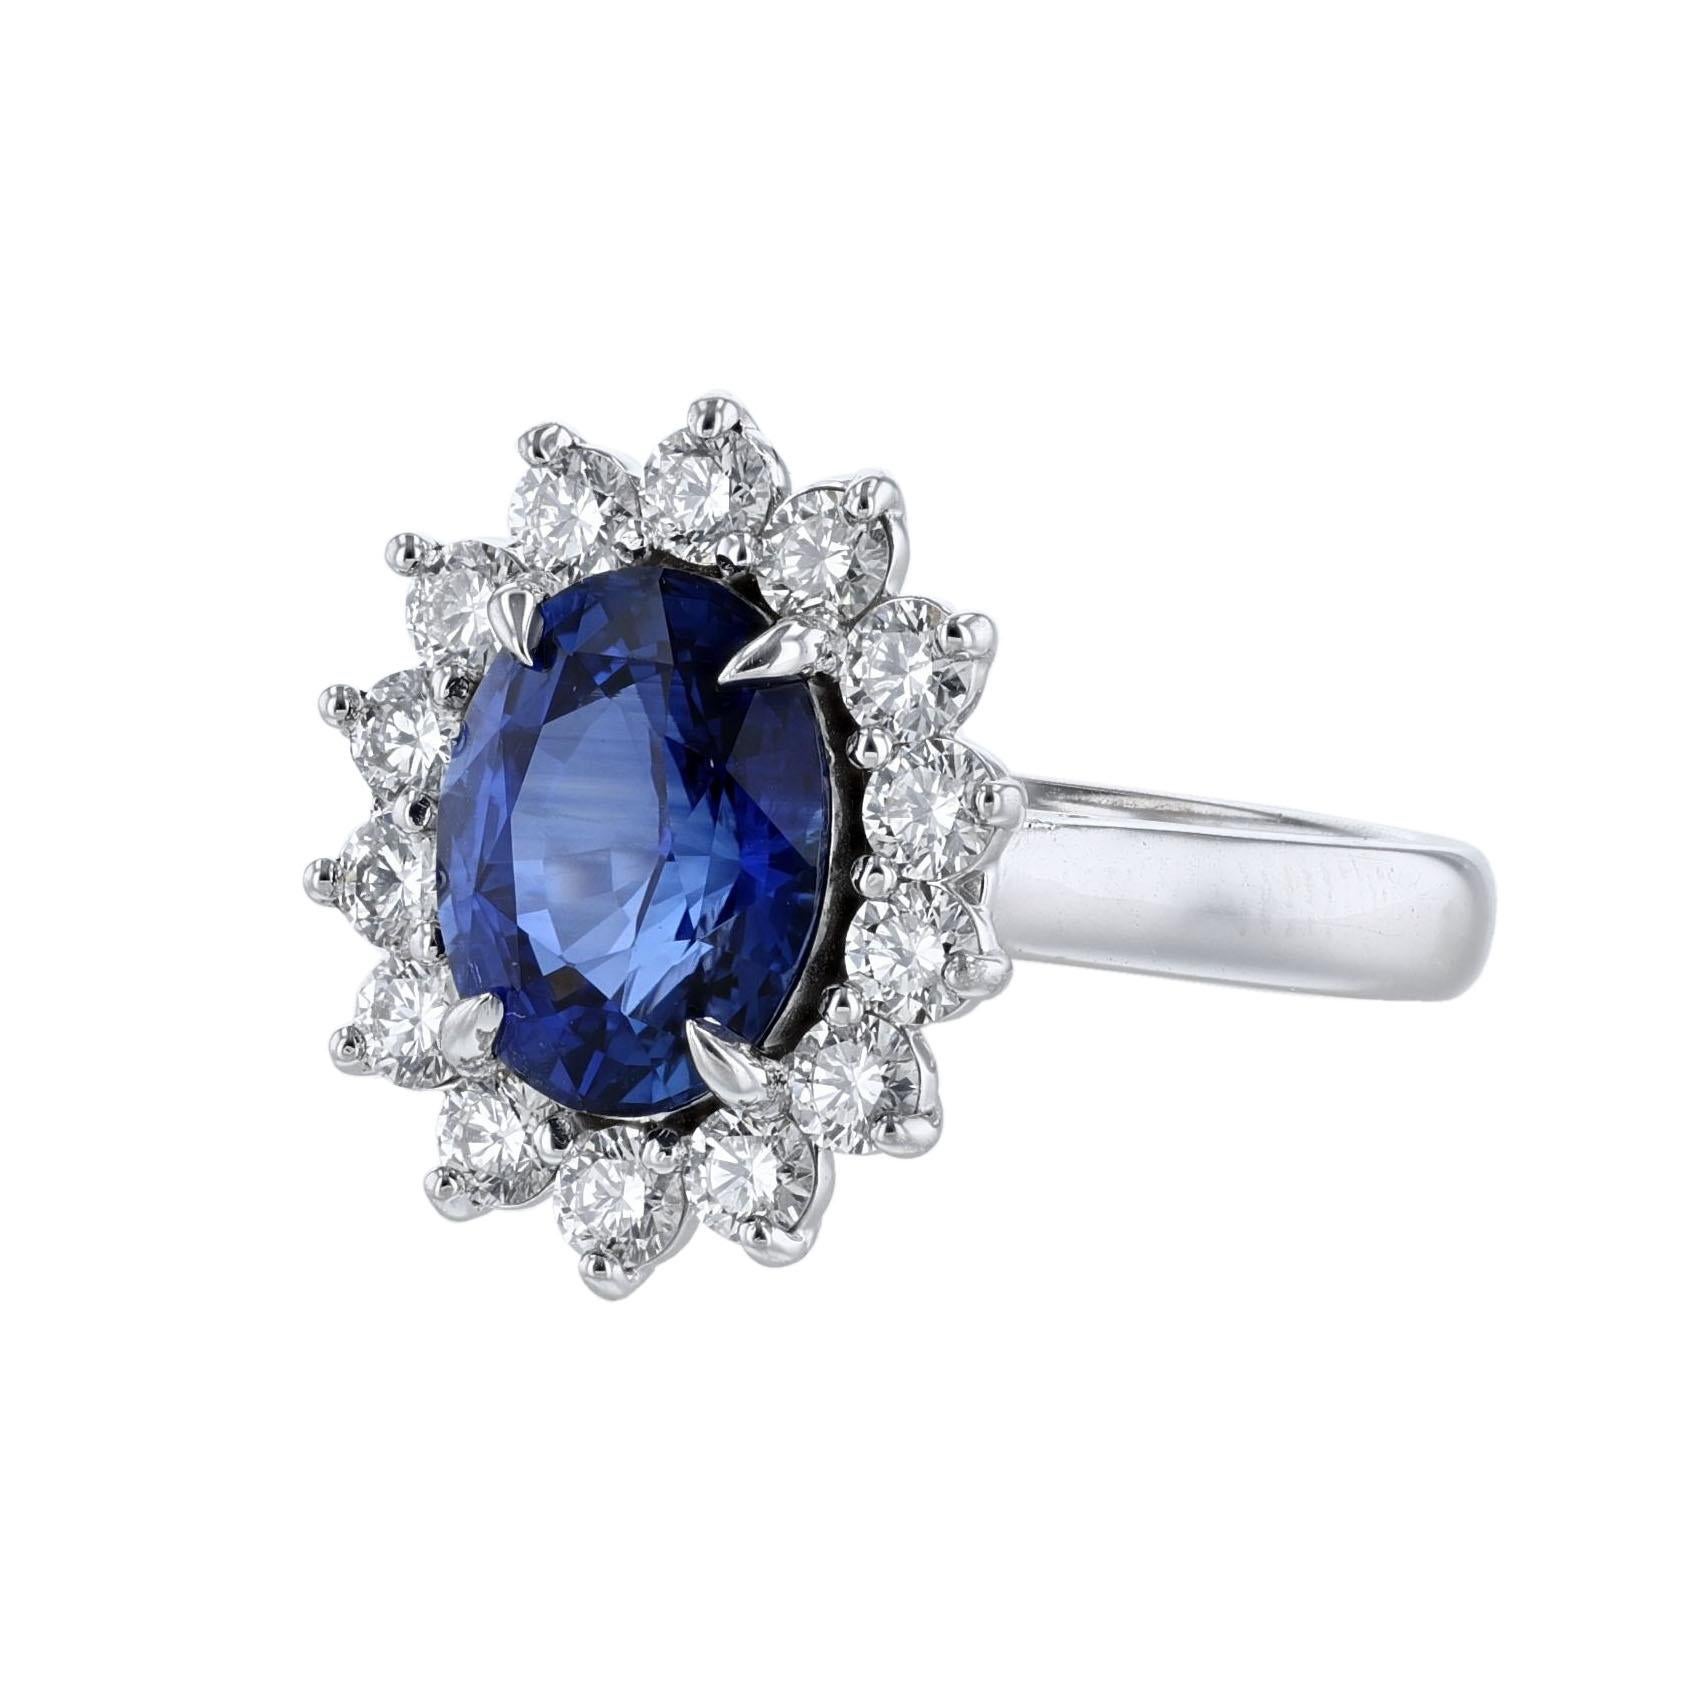 This ring is in 18K white gold. It features 1 oval-cut blue sapphire weighing 3.03. The stone is GIA certified with GIA 6183650942. It also features 14 round cut diamonds weighing 0.81 carats. With a color grade (H) and clarity grade (SI2). All